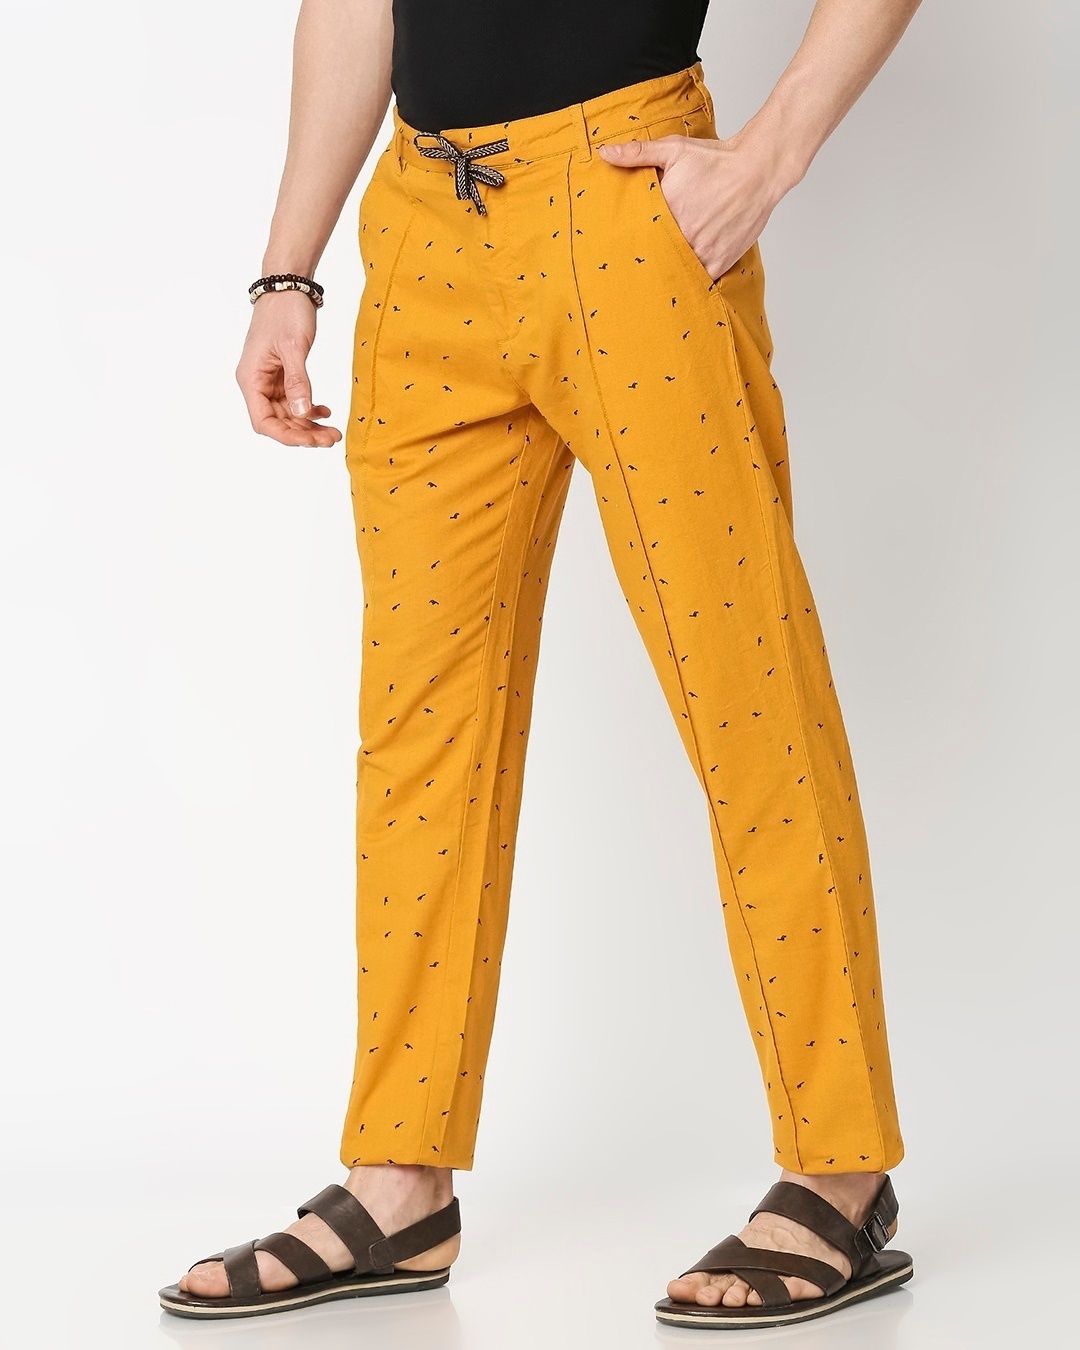 Shop Men's All Over Printed Indo Fusion Pants-Design